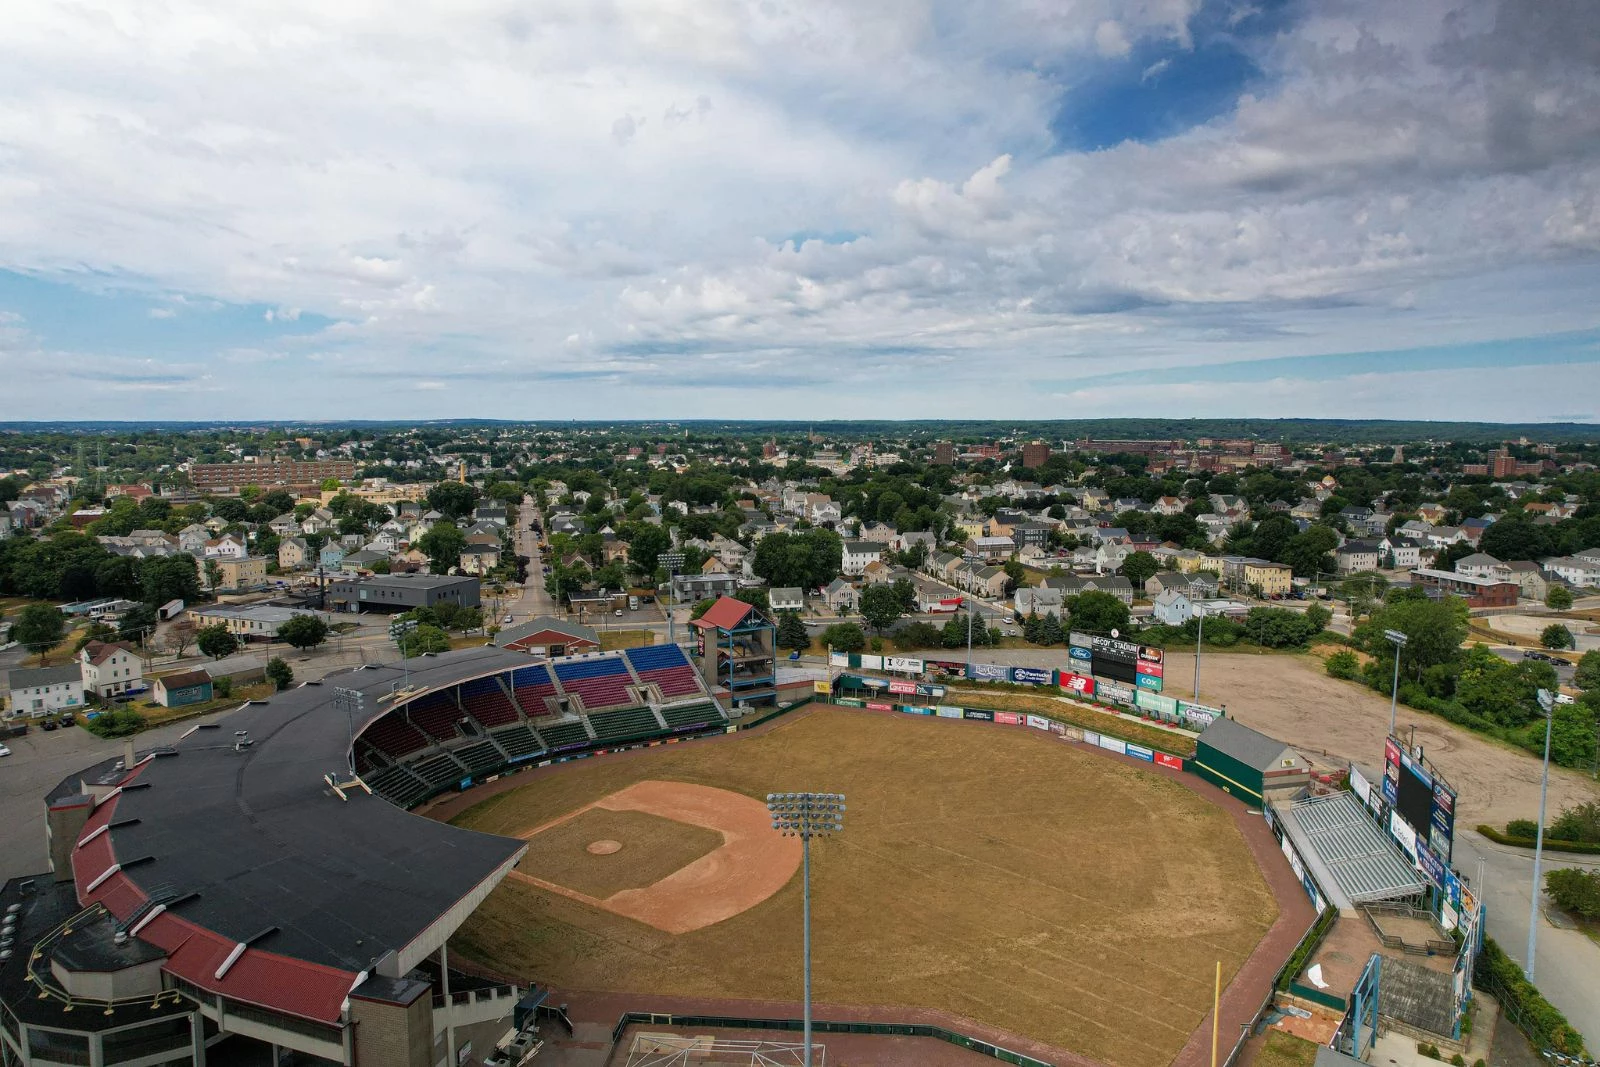 PawSox get a whole new look, Pawtucket